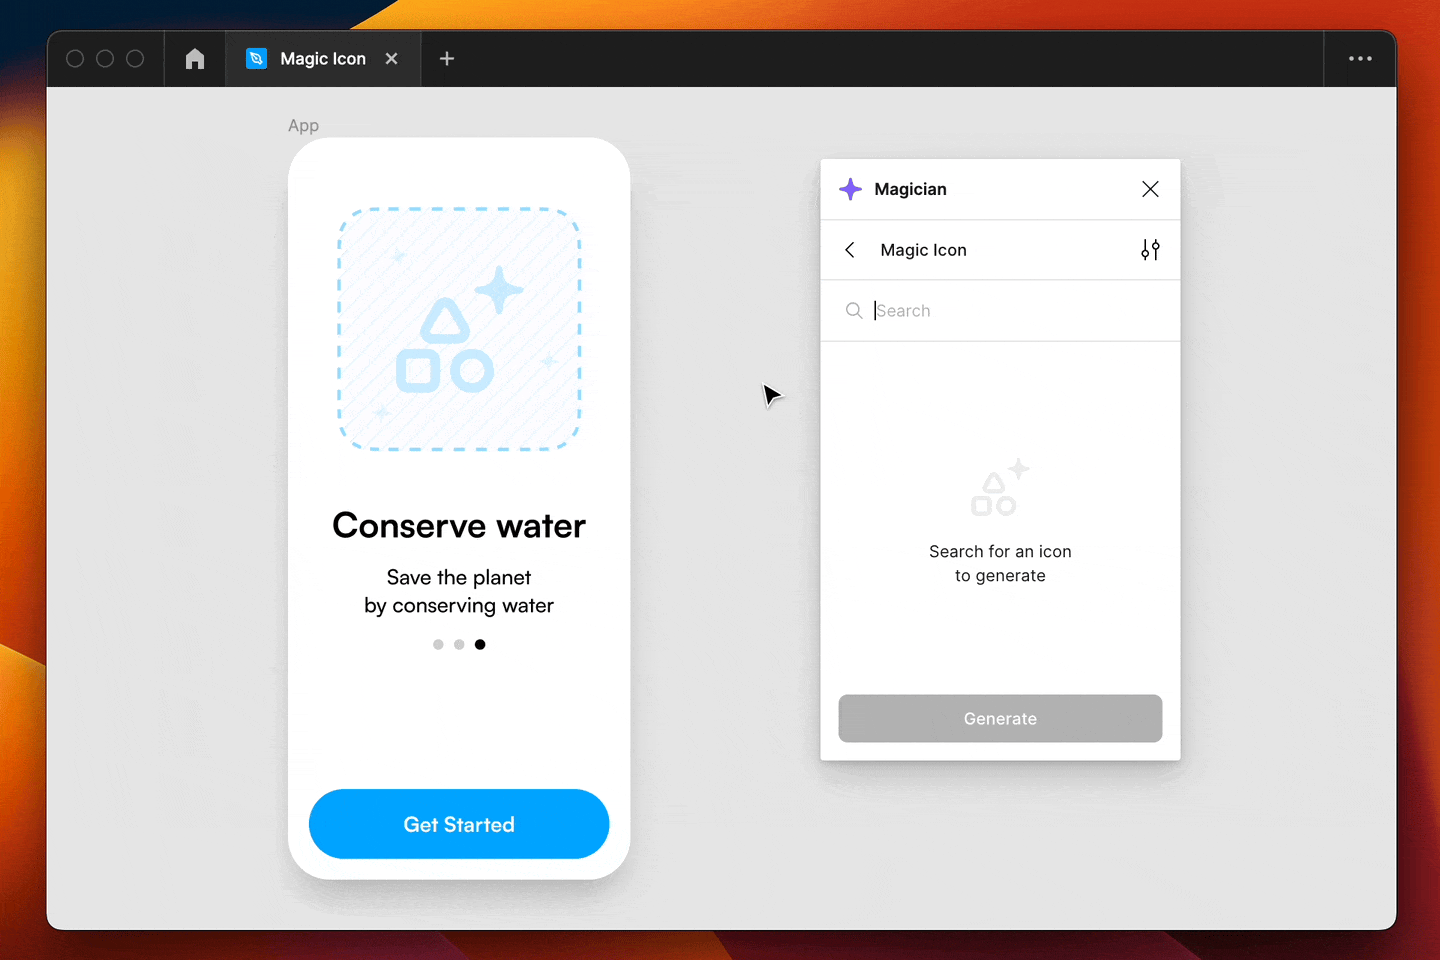 The tool generating 4 different icons from the input “hand holding water”. The selected icon is dragged and dropped into the design.